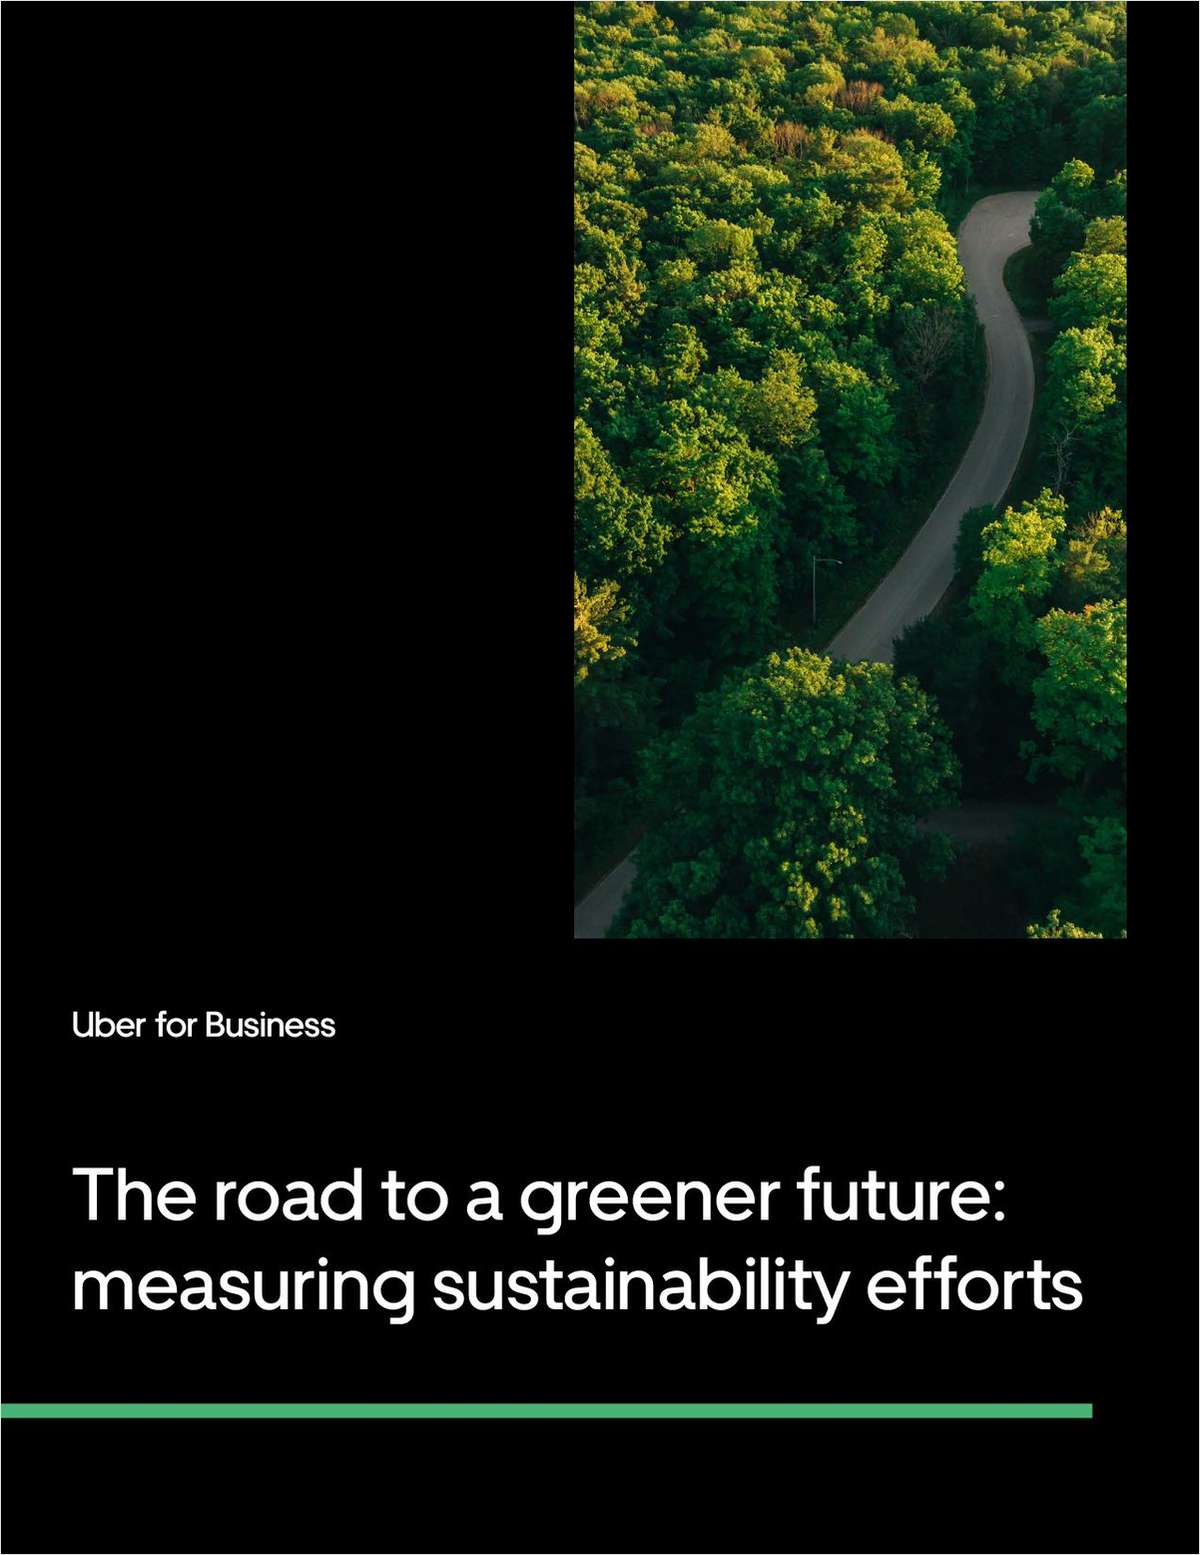 The road to a greener future: measuring sustainability efforts